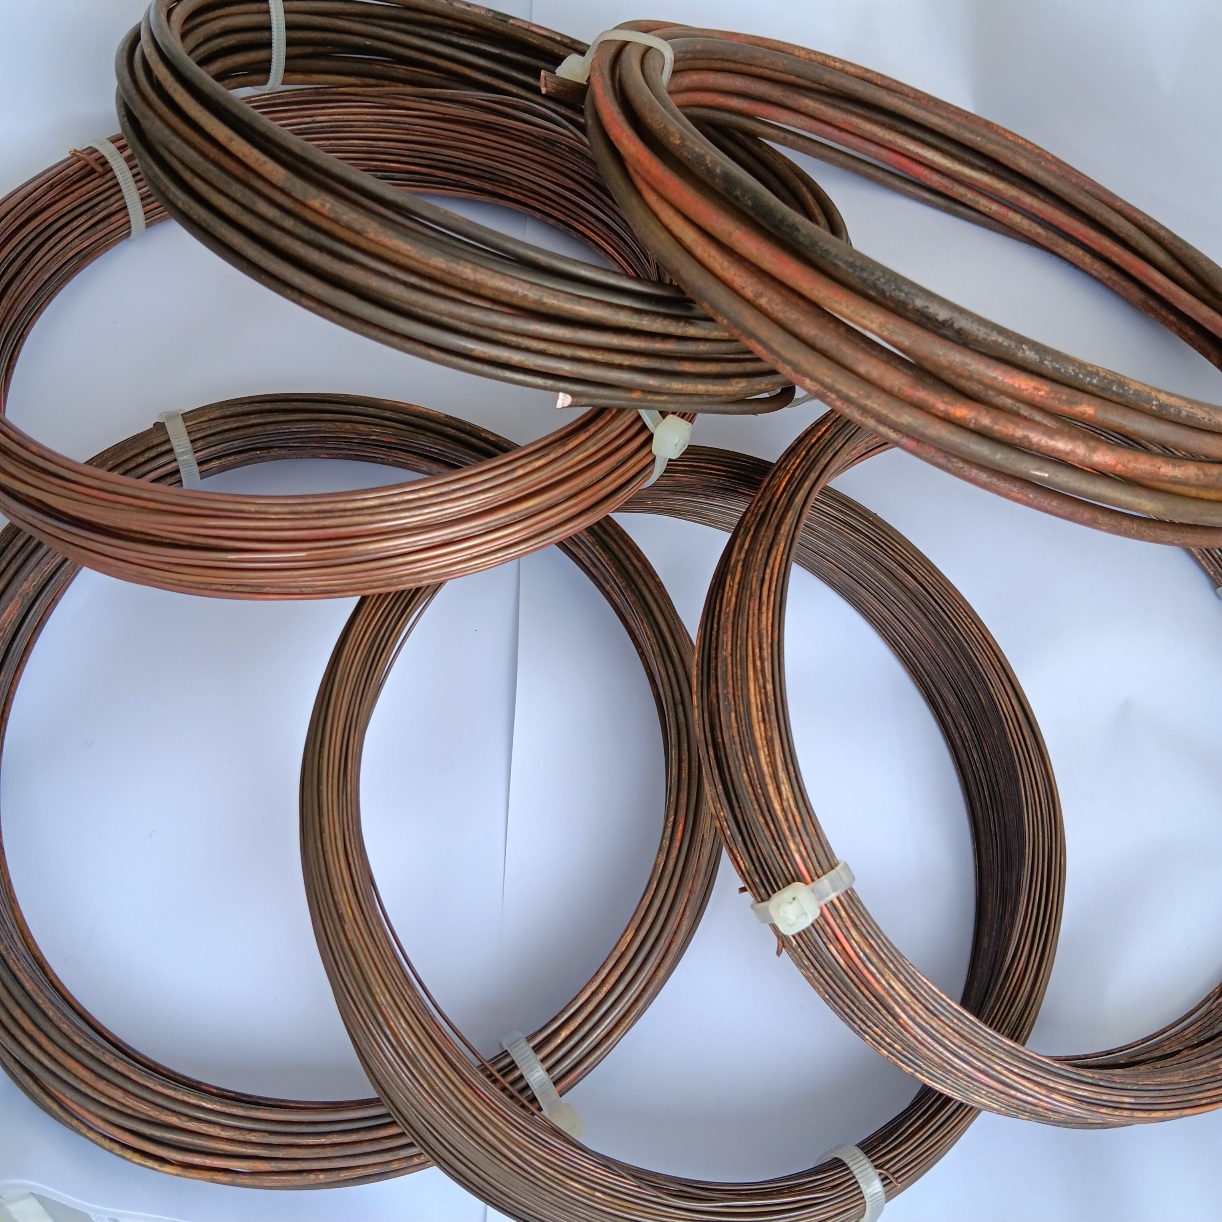 4mm SOFT PATINATED/OXIDIZED COPPER WIRE 500grams